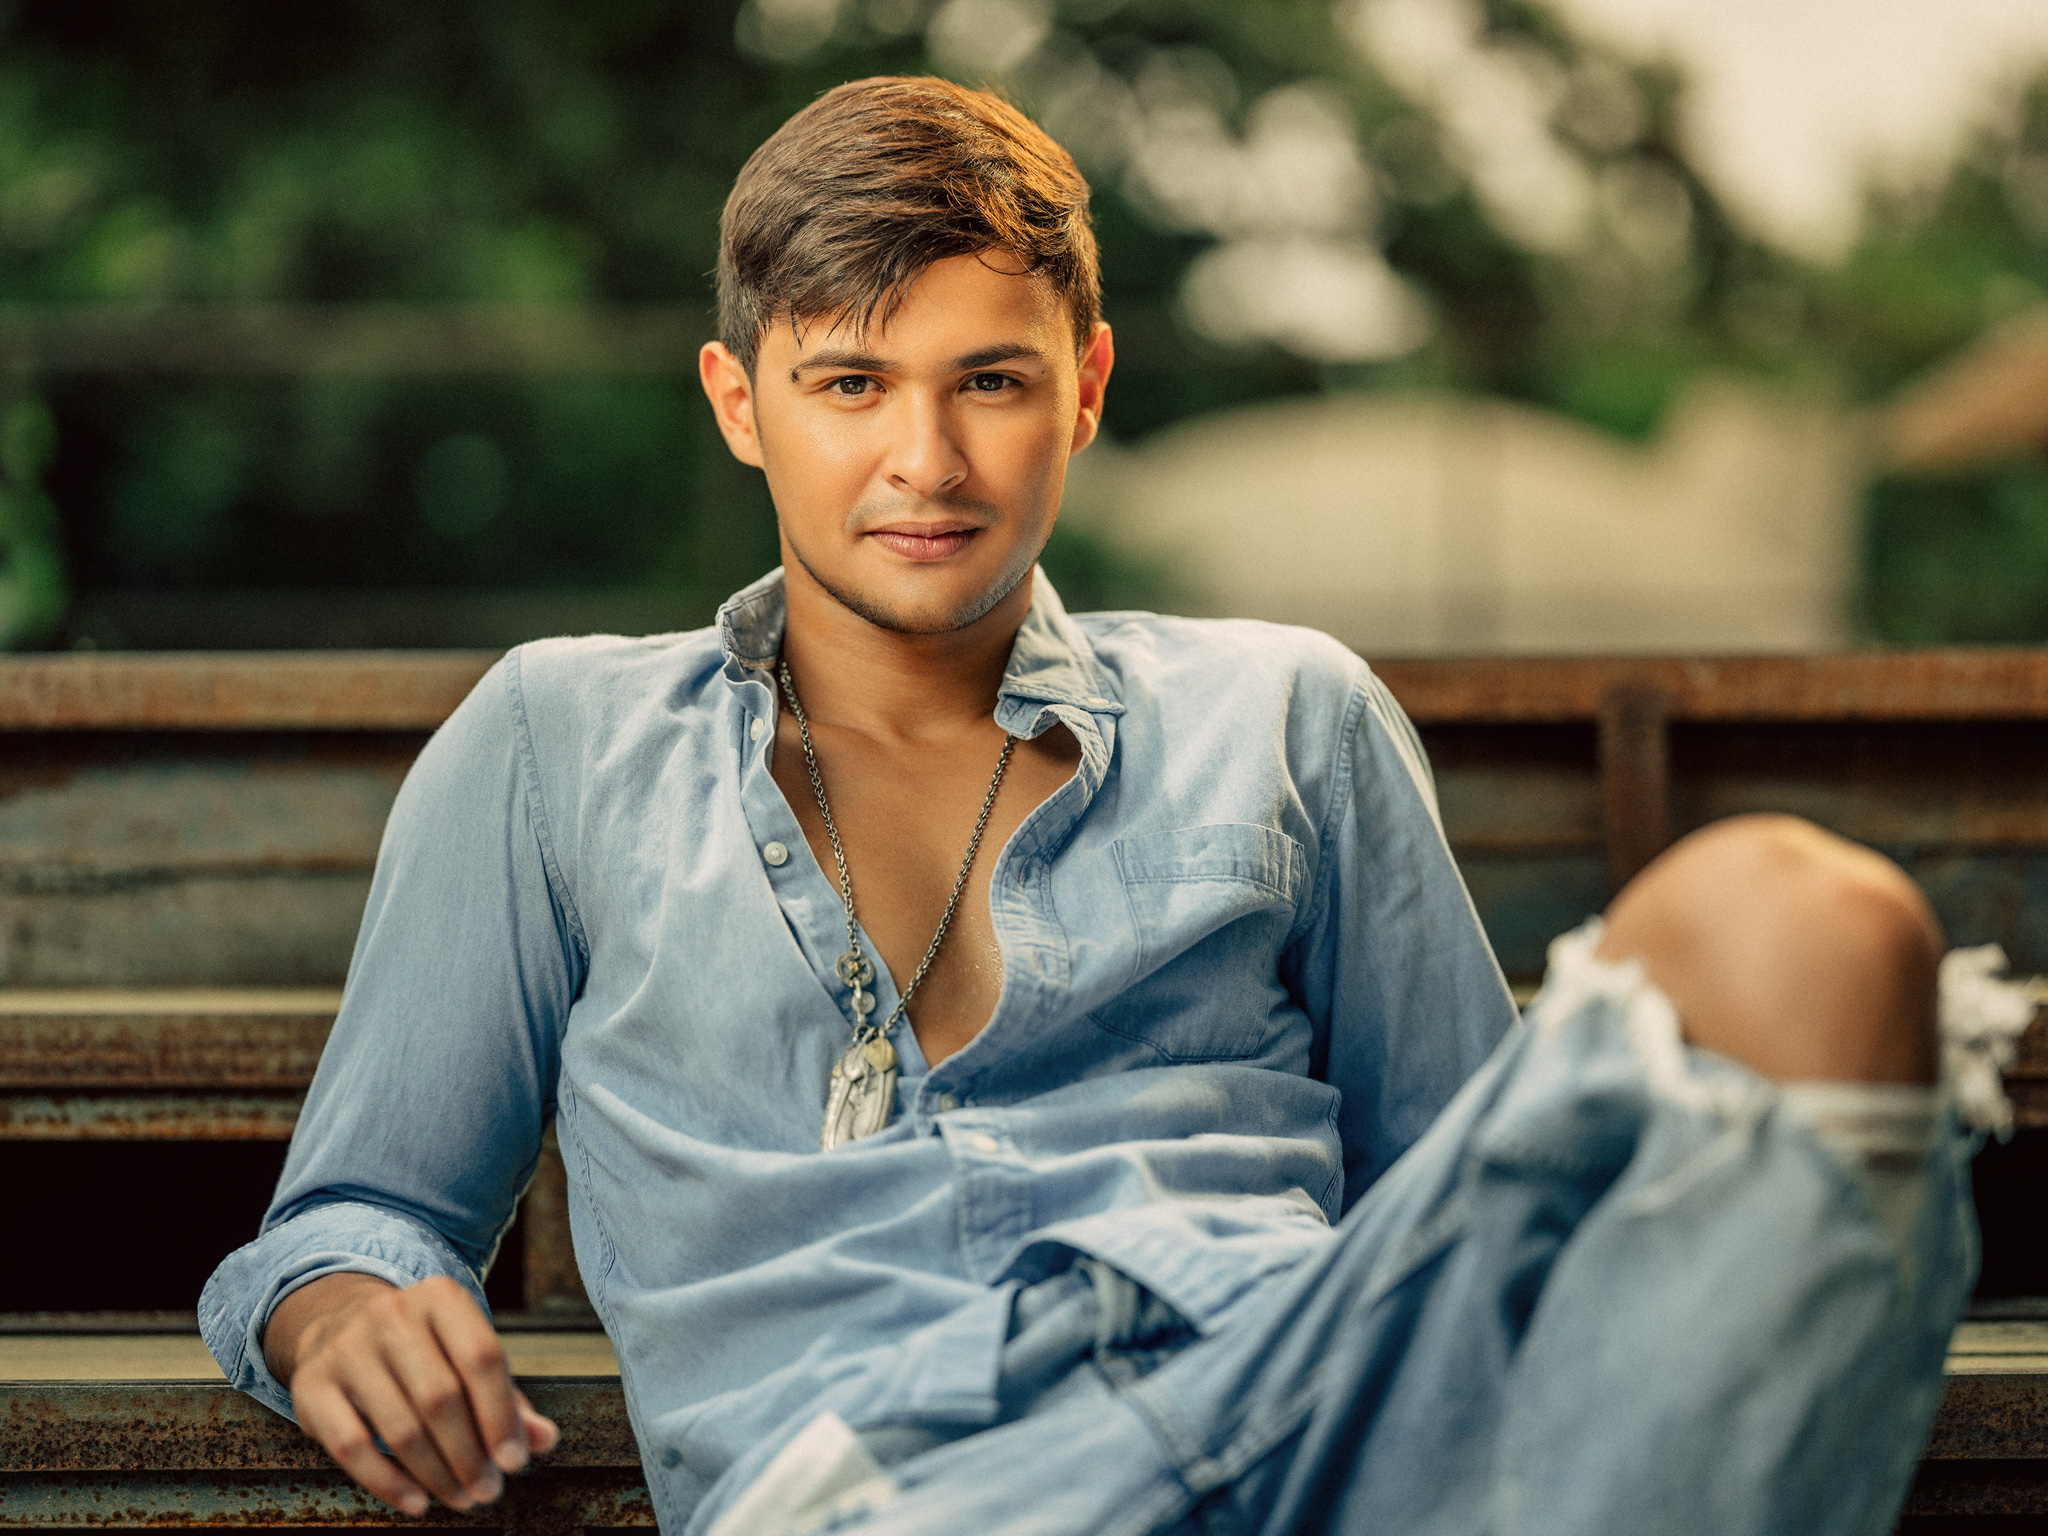 Matteo Guidicelli Gears Up For His Concert ‘Hey Matteo’ in November